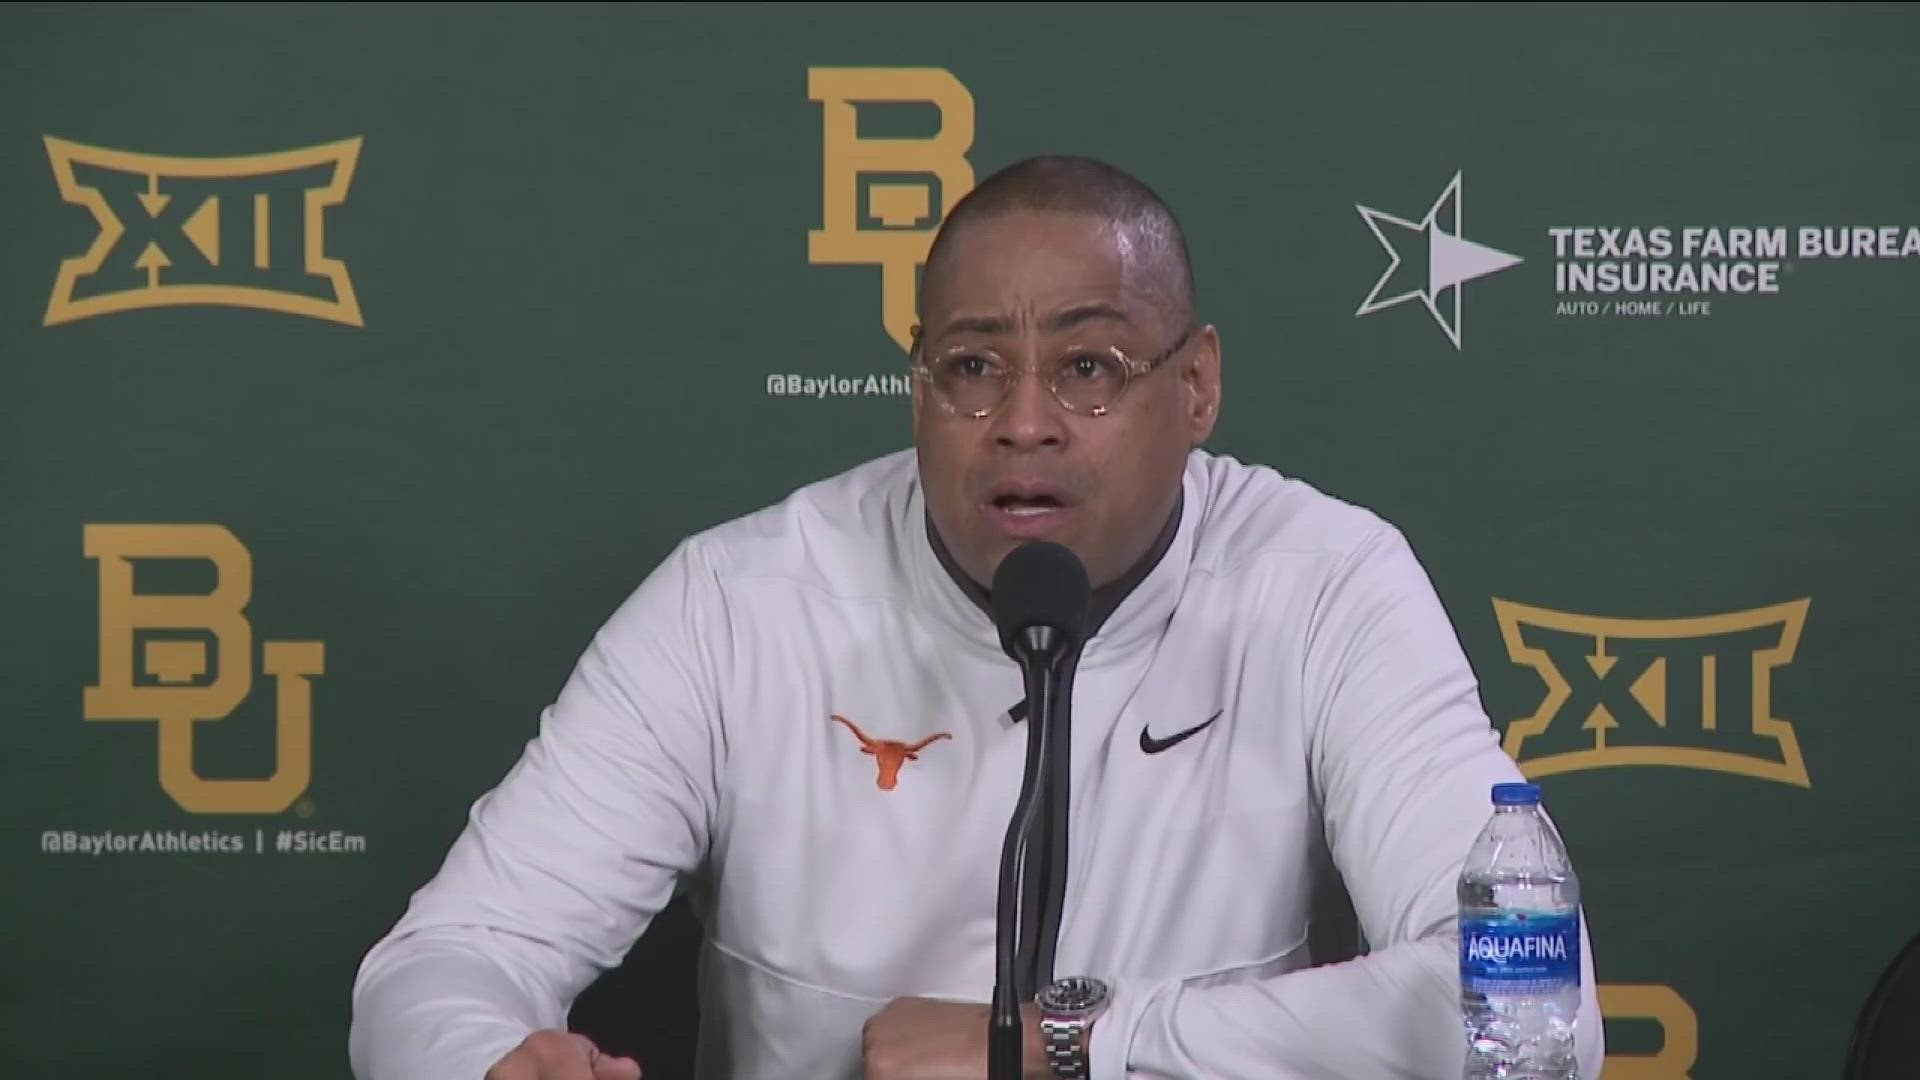 Texas men's basketball fell short at Baylor, 81-72. The Longhorns committed 21 turnovers.